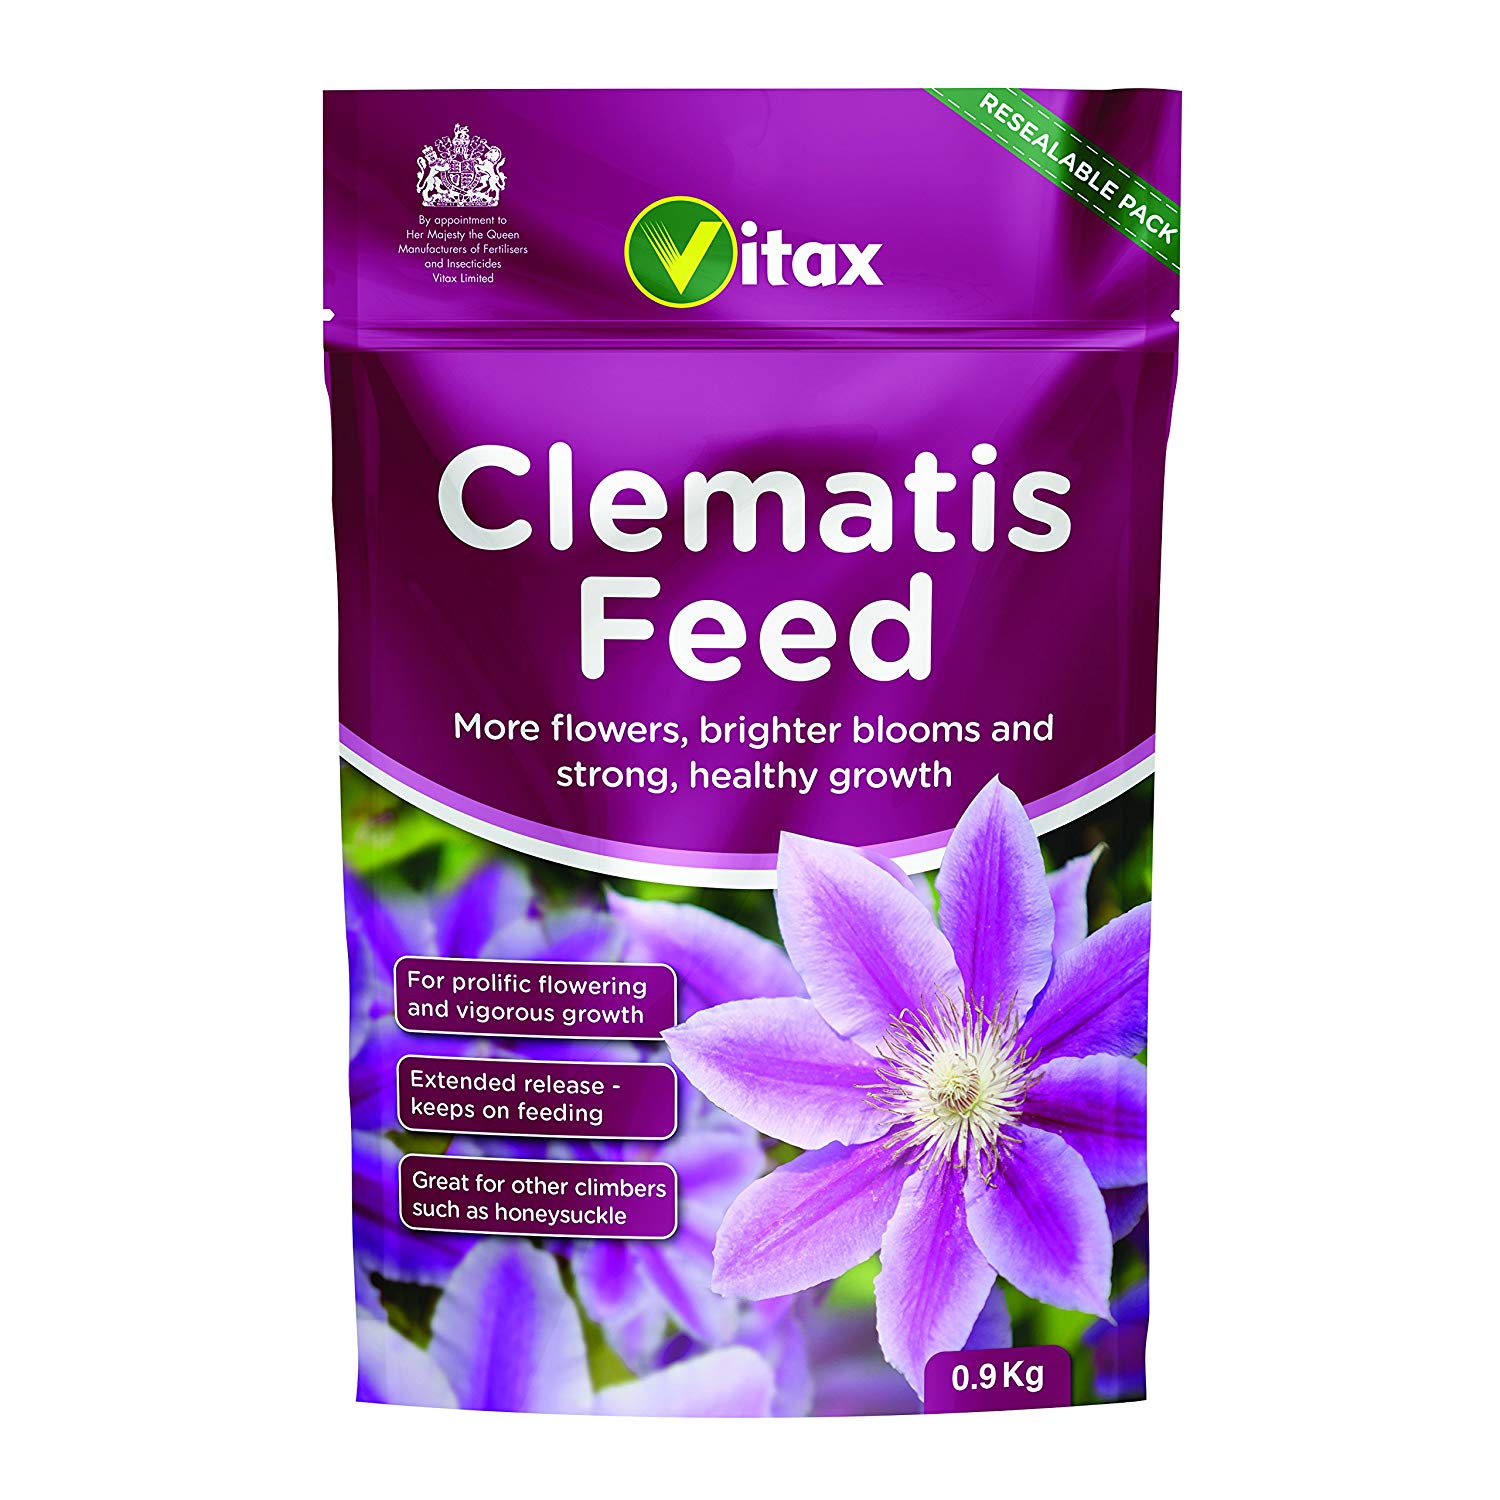 Vitax Clematis Feed Pouch - 0.9Kg